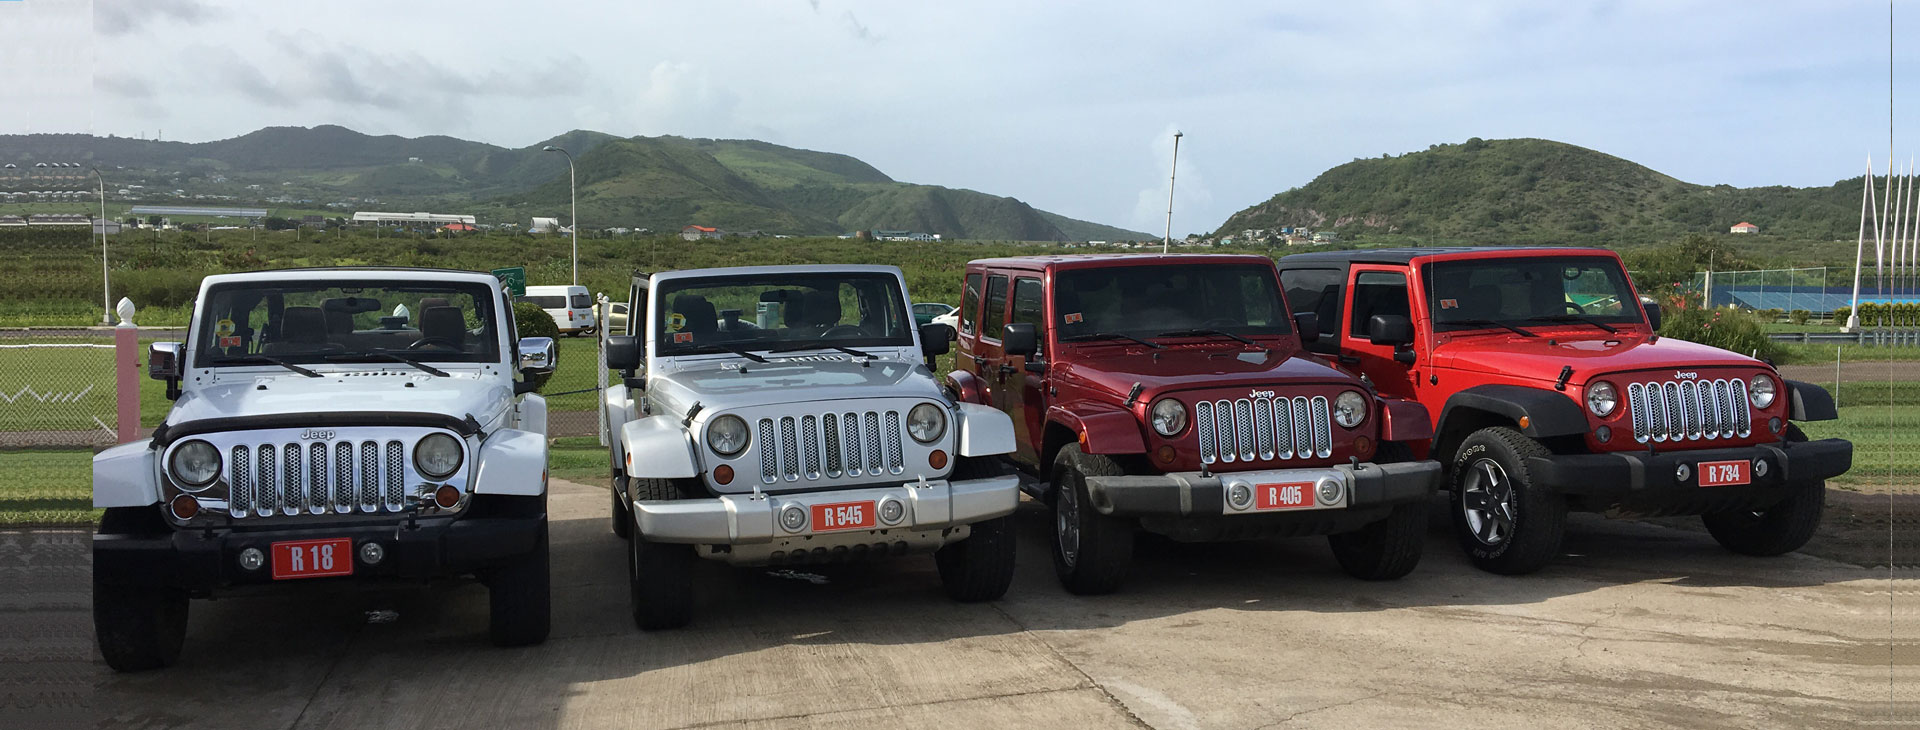 WIDE VARIETY OF WRANGLERS